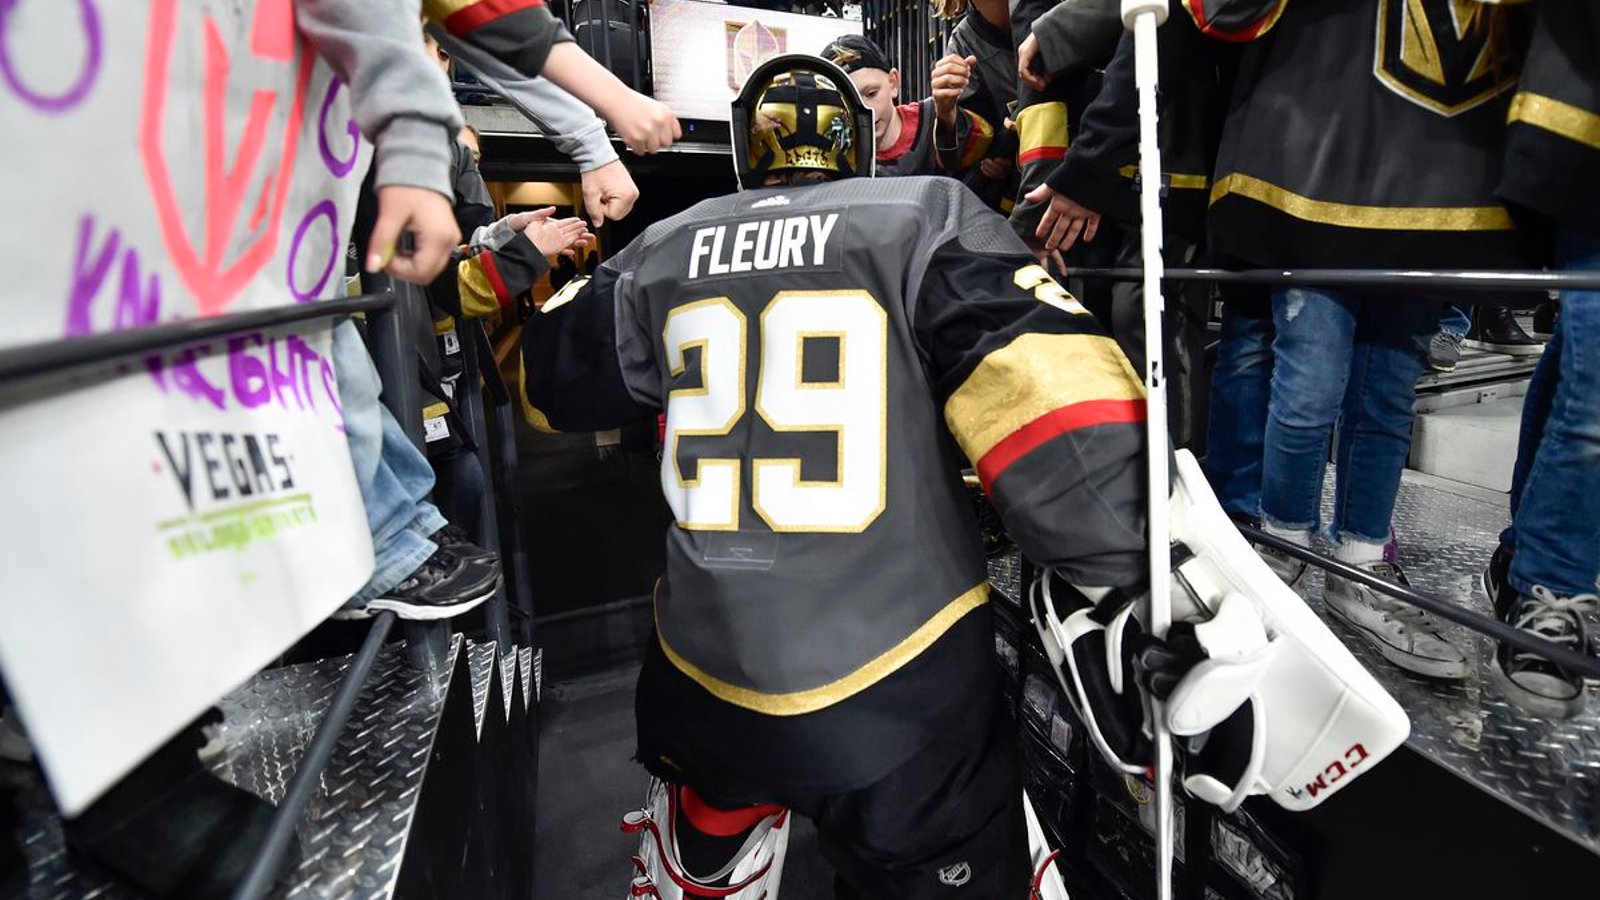 Fleury’s former teammate shares new information on his trade out of Vegas 